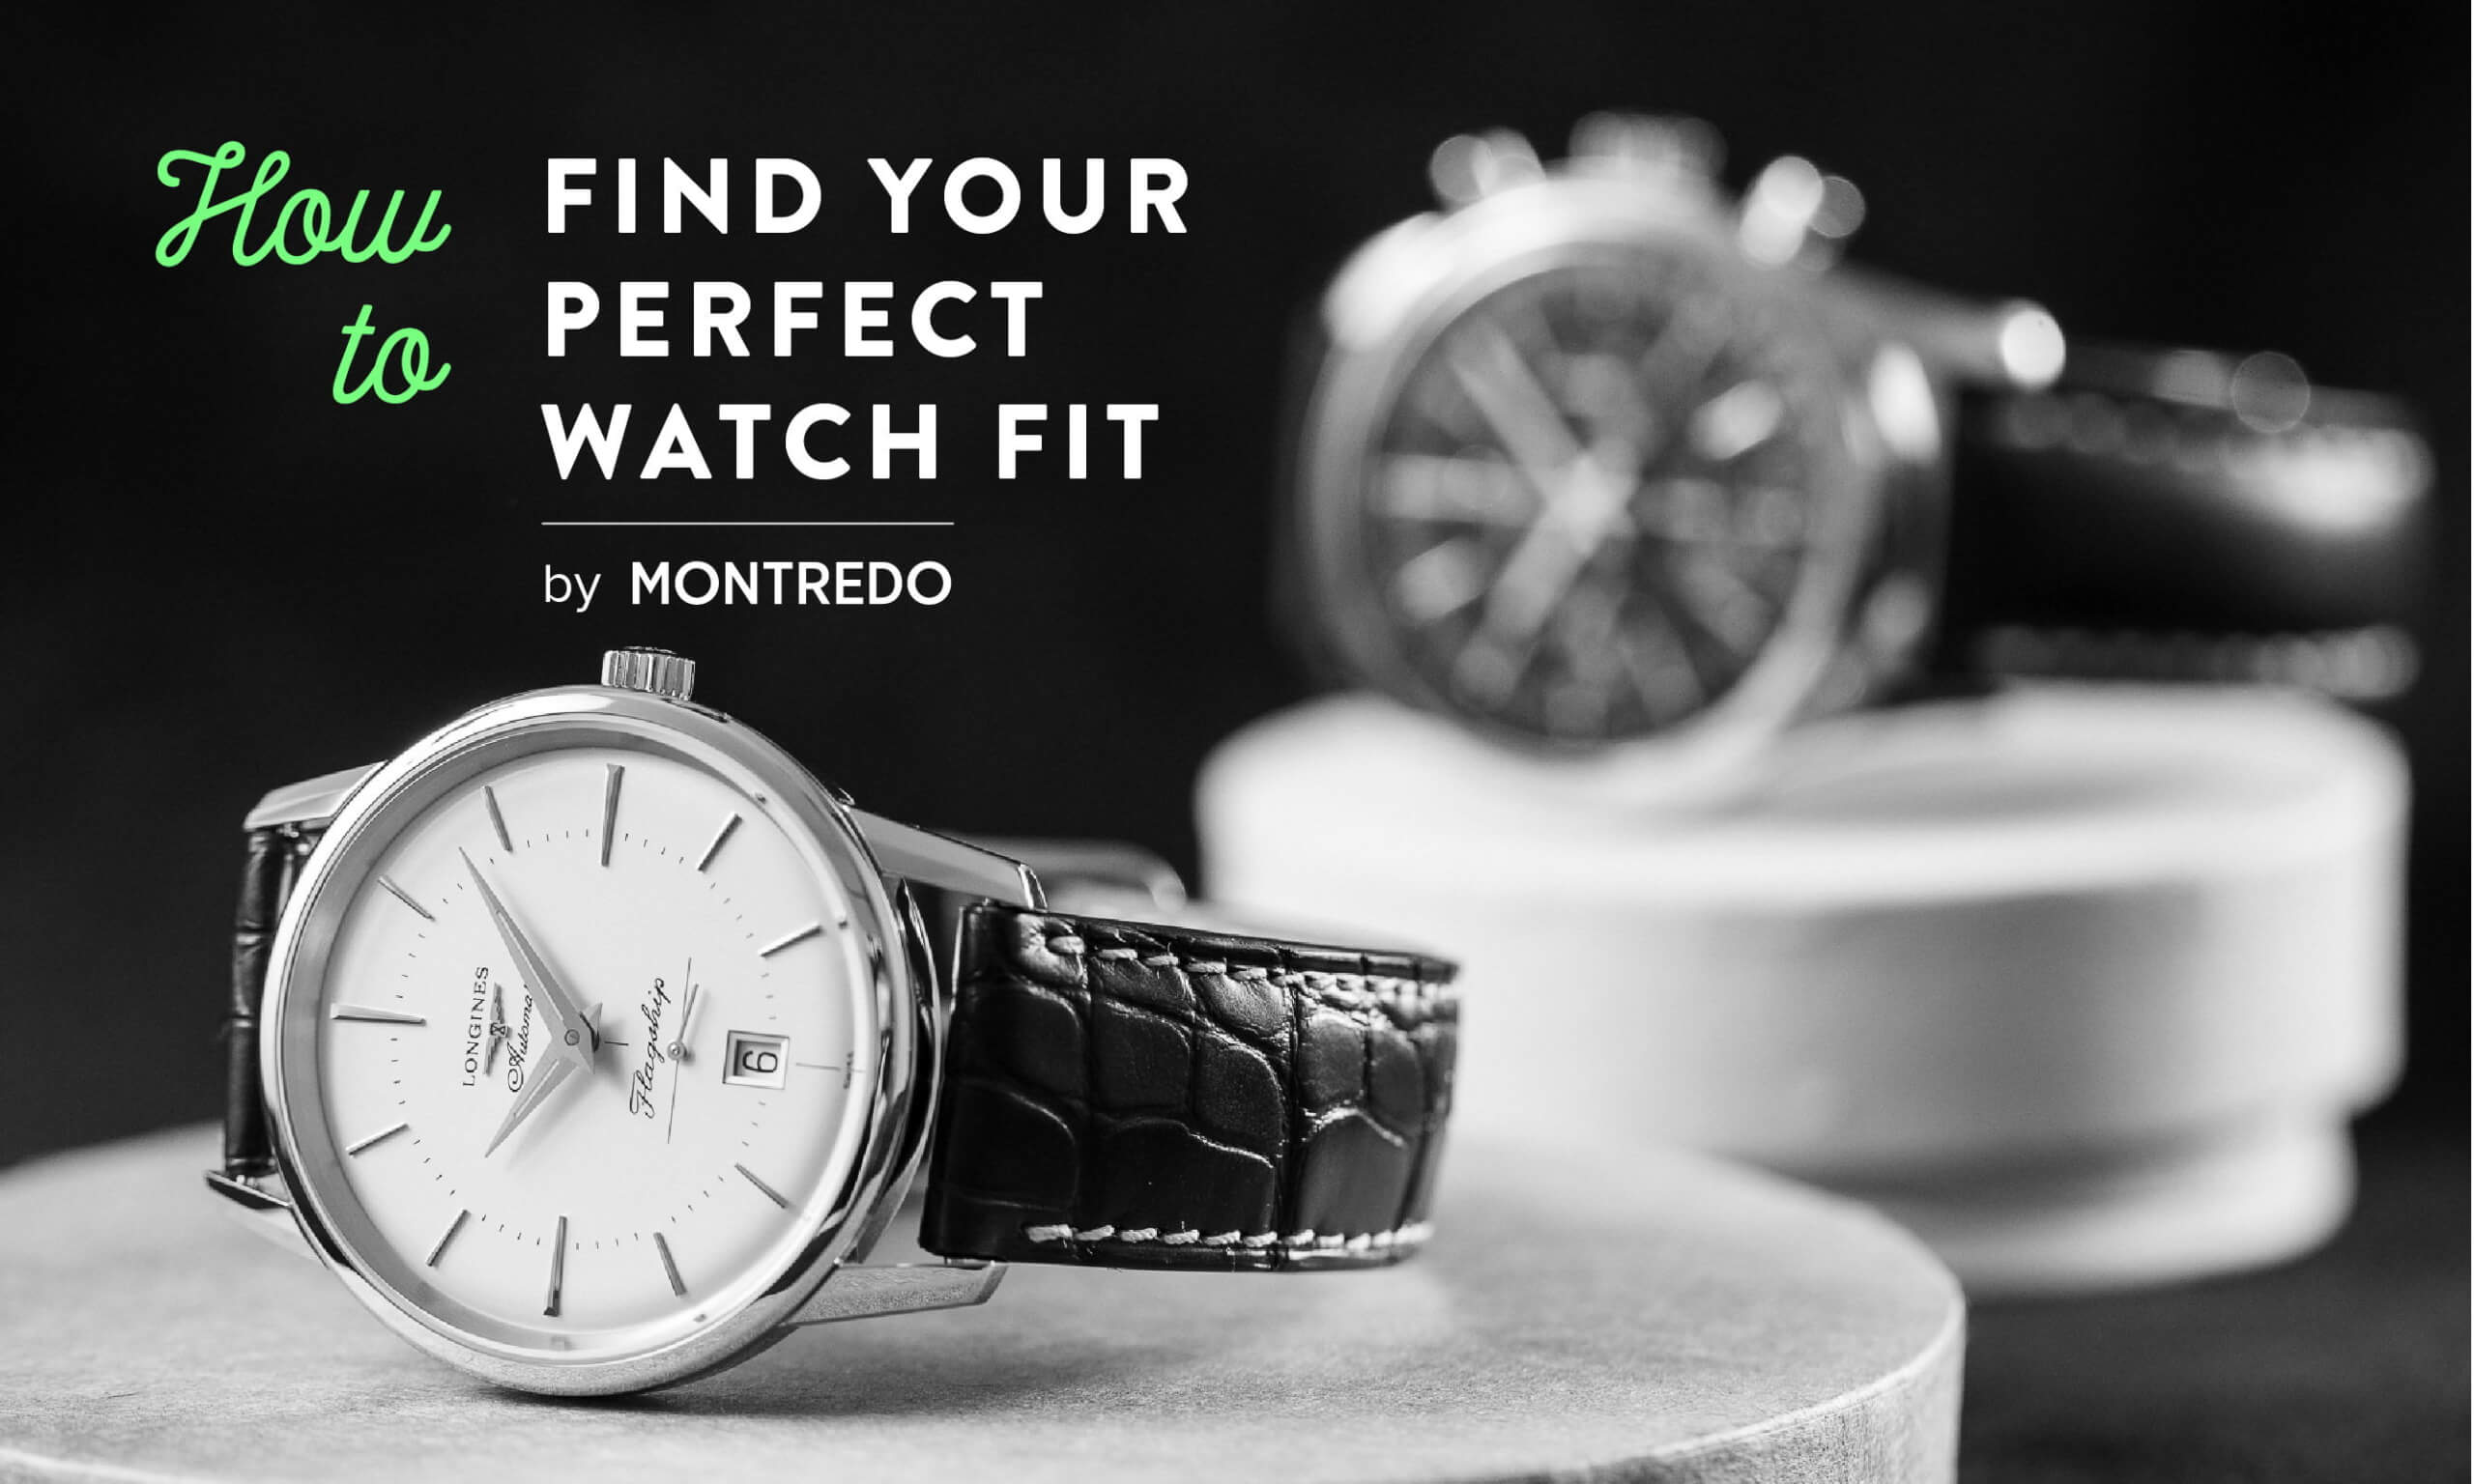 How to find the perfect watch fit, by Montredo.